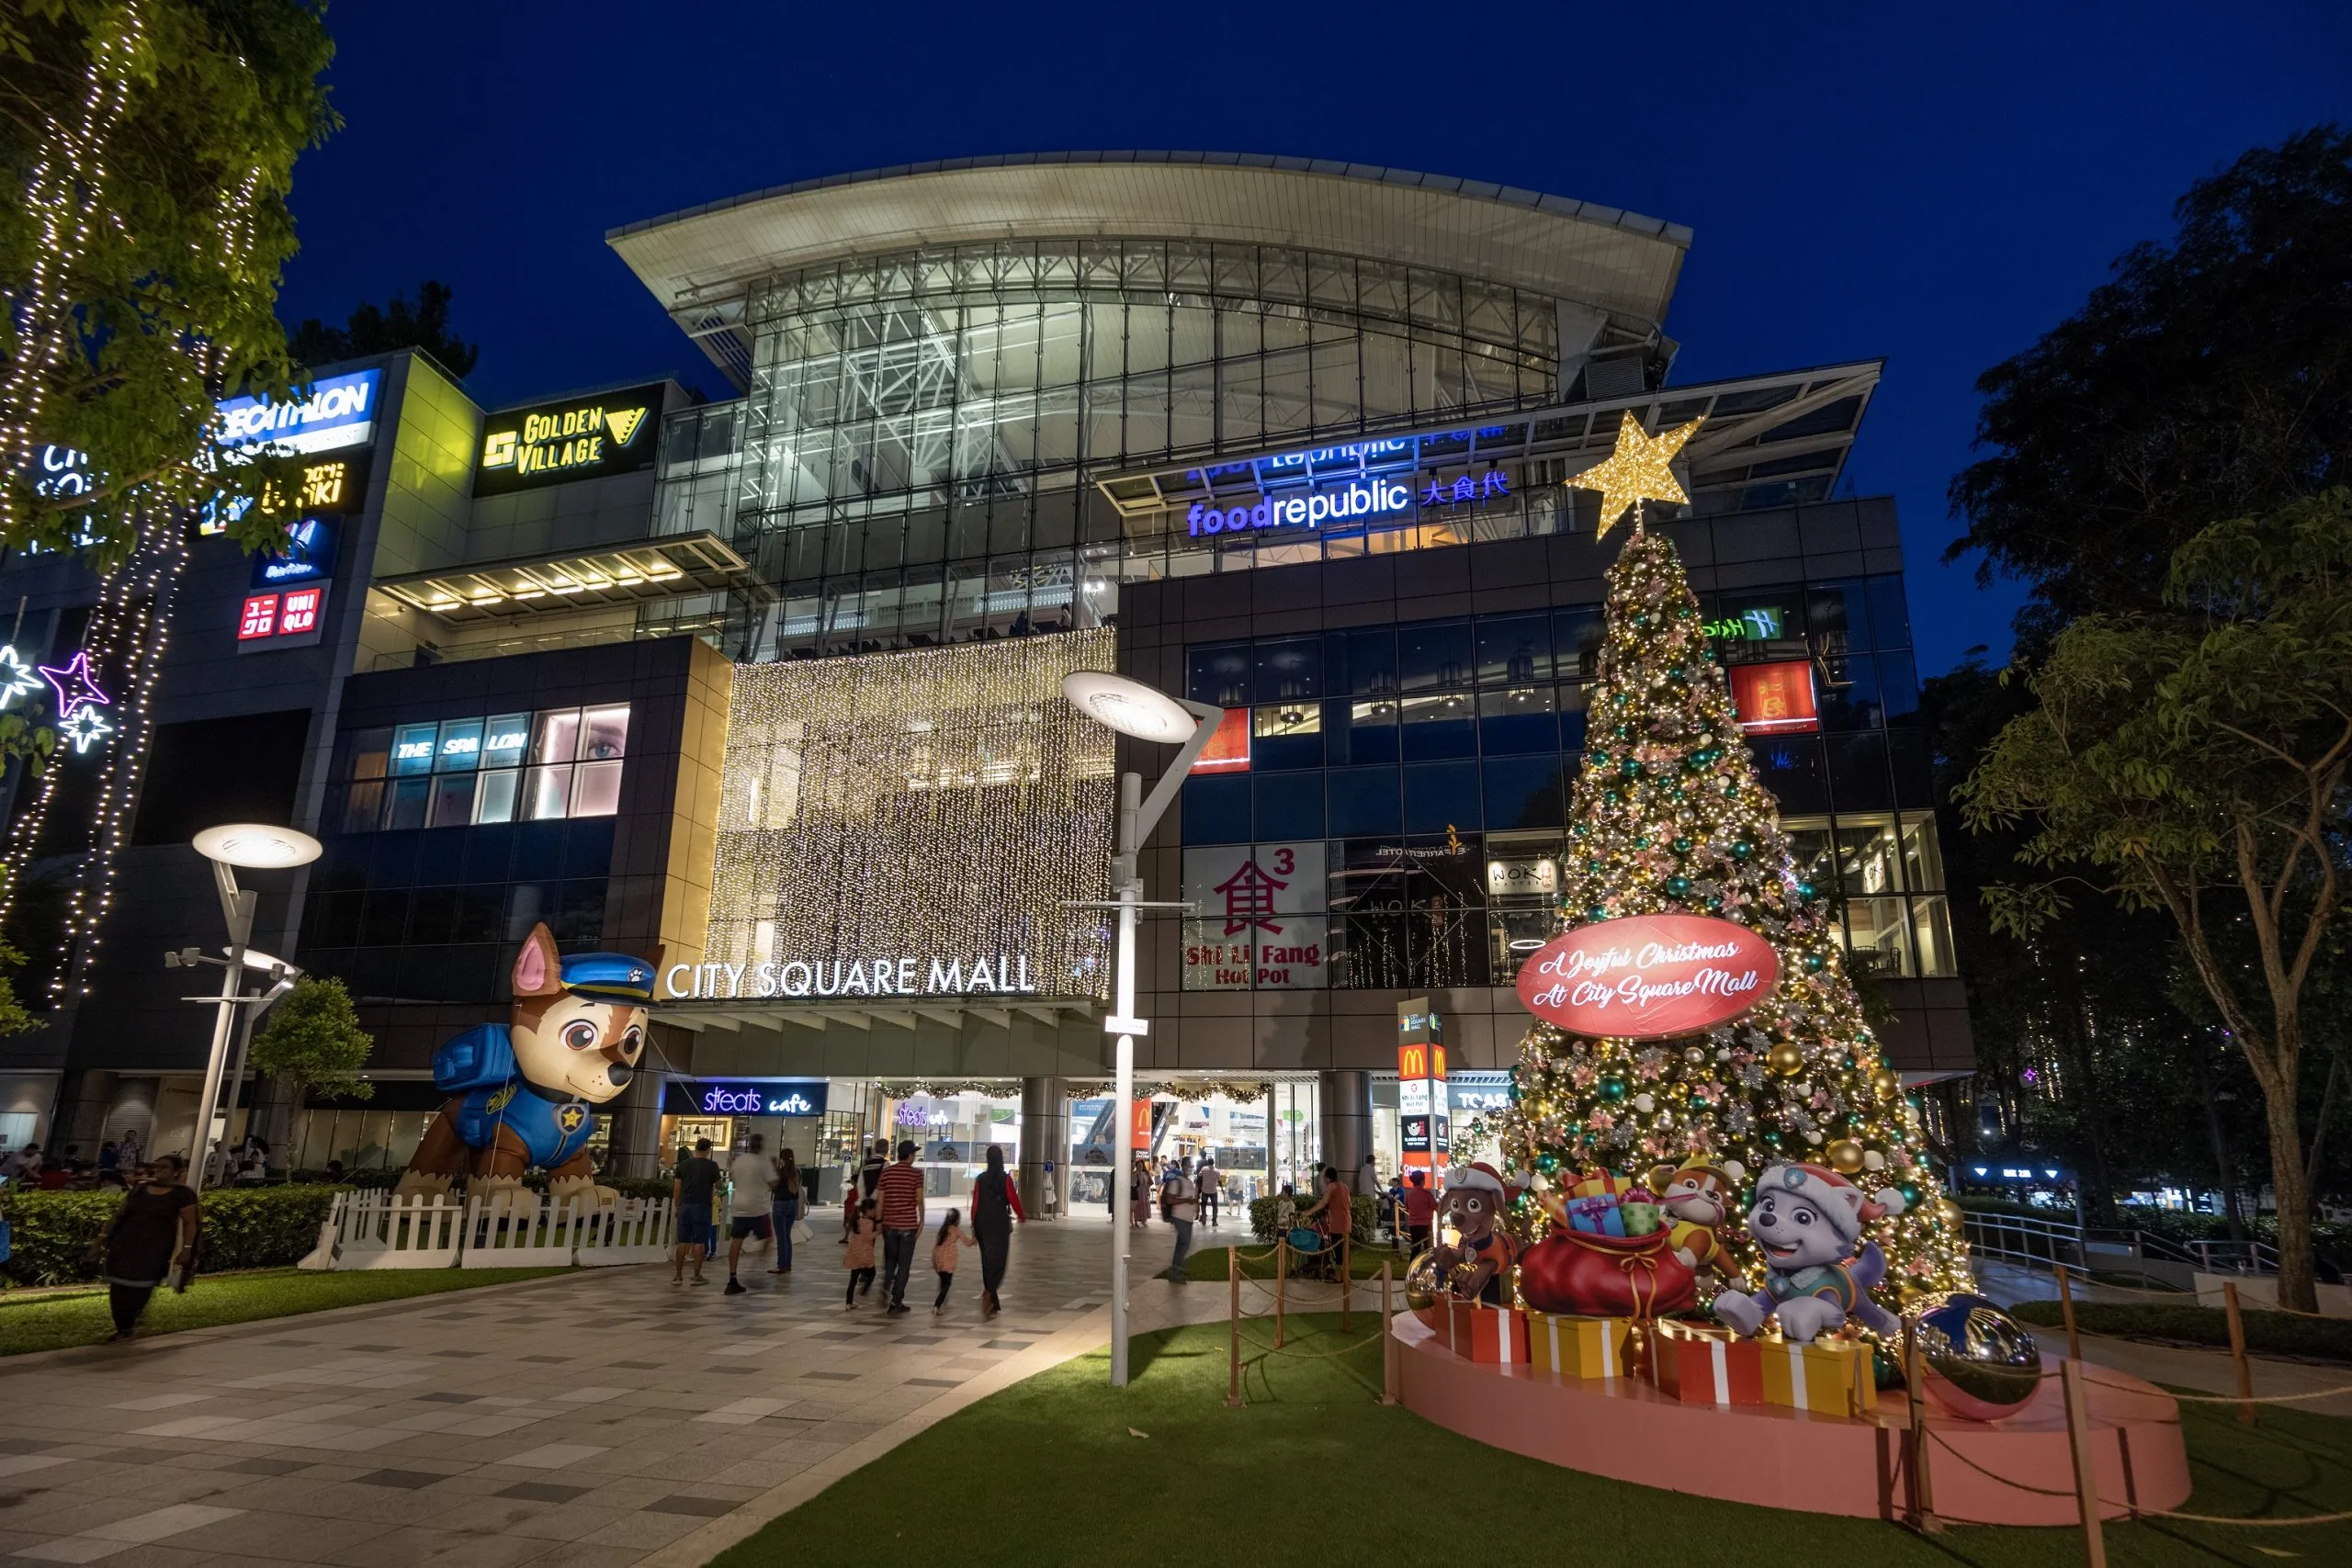 City Square Mall in Singapore, central_asia | Sporting Equipment,Handbags,Shoes,Clothes,Sweets,Cosmetics,Swimwear - Country Helper